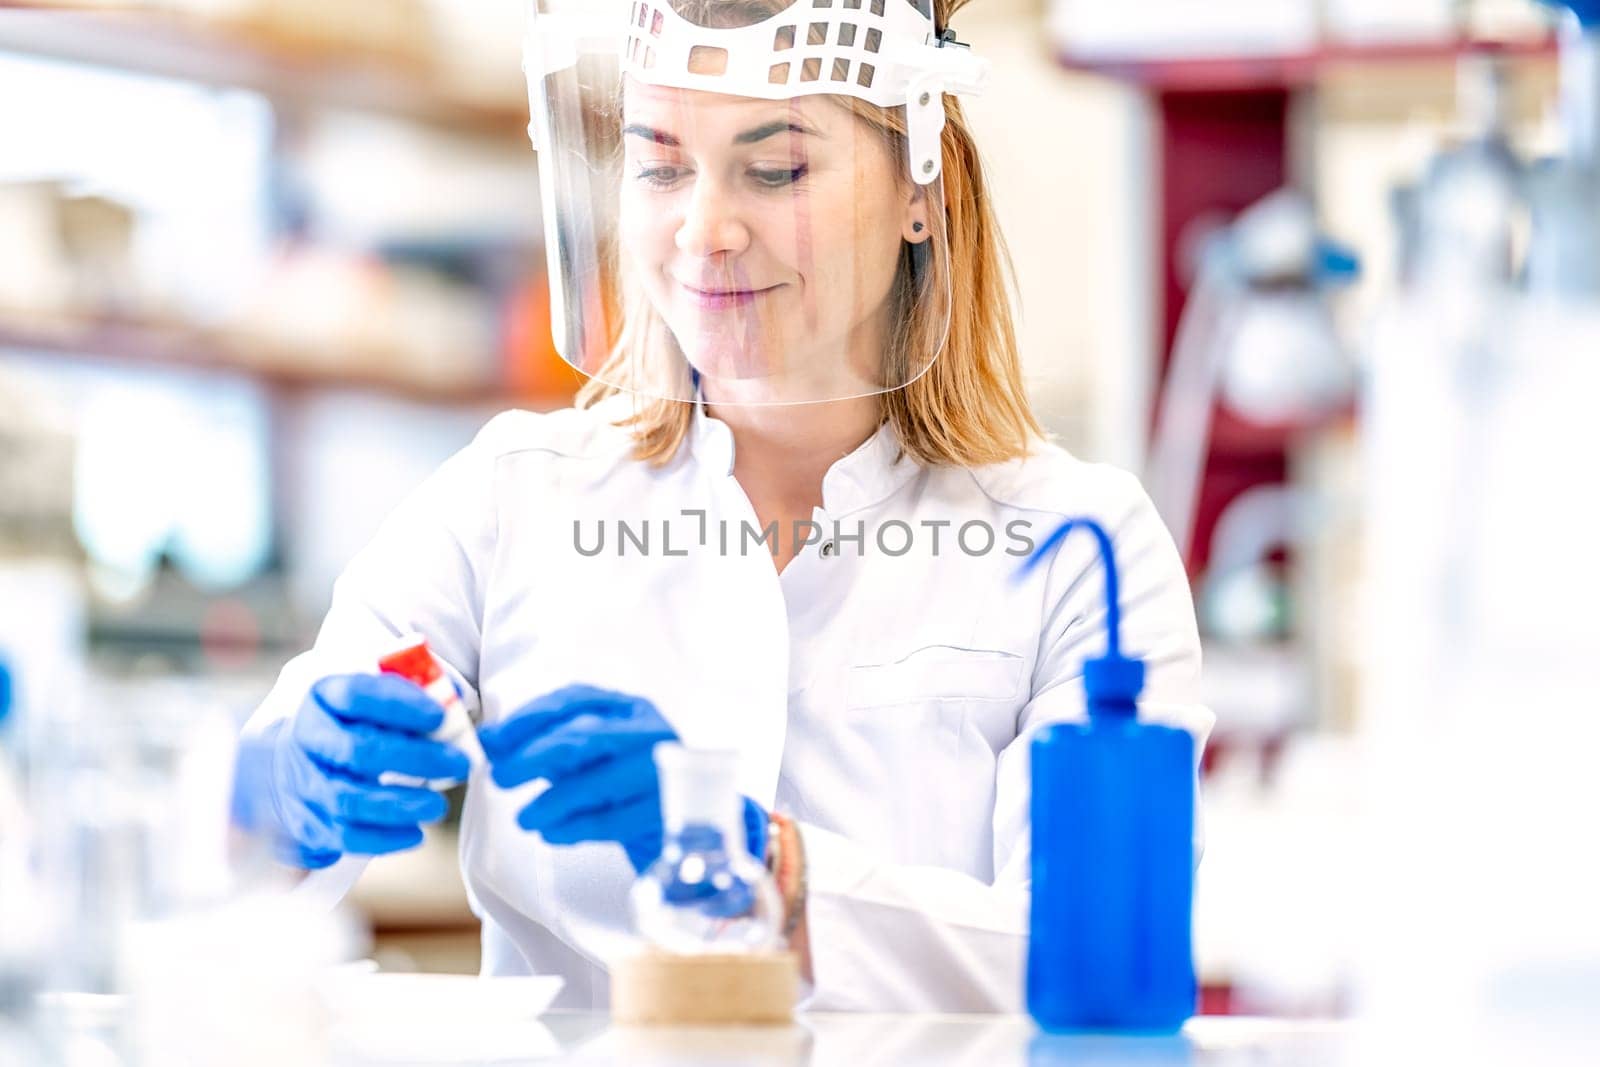 research of dangerous chemical substances in a biochemical laboratory. female scientist uses protective equipment. High quality photo